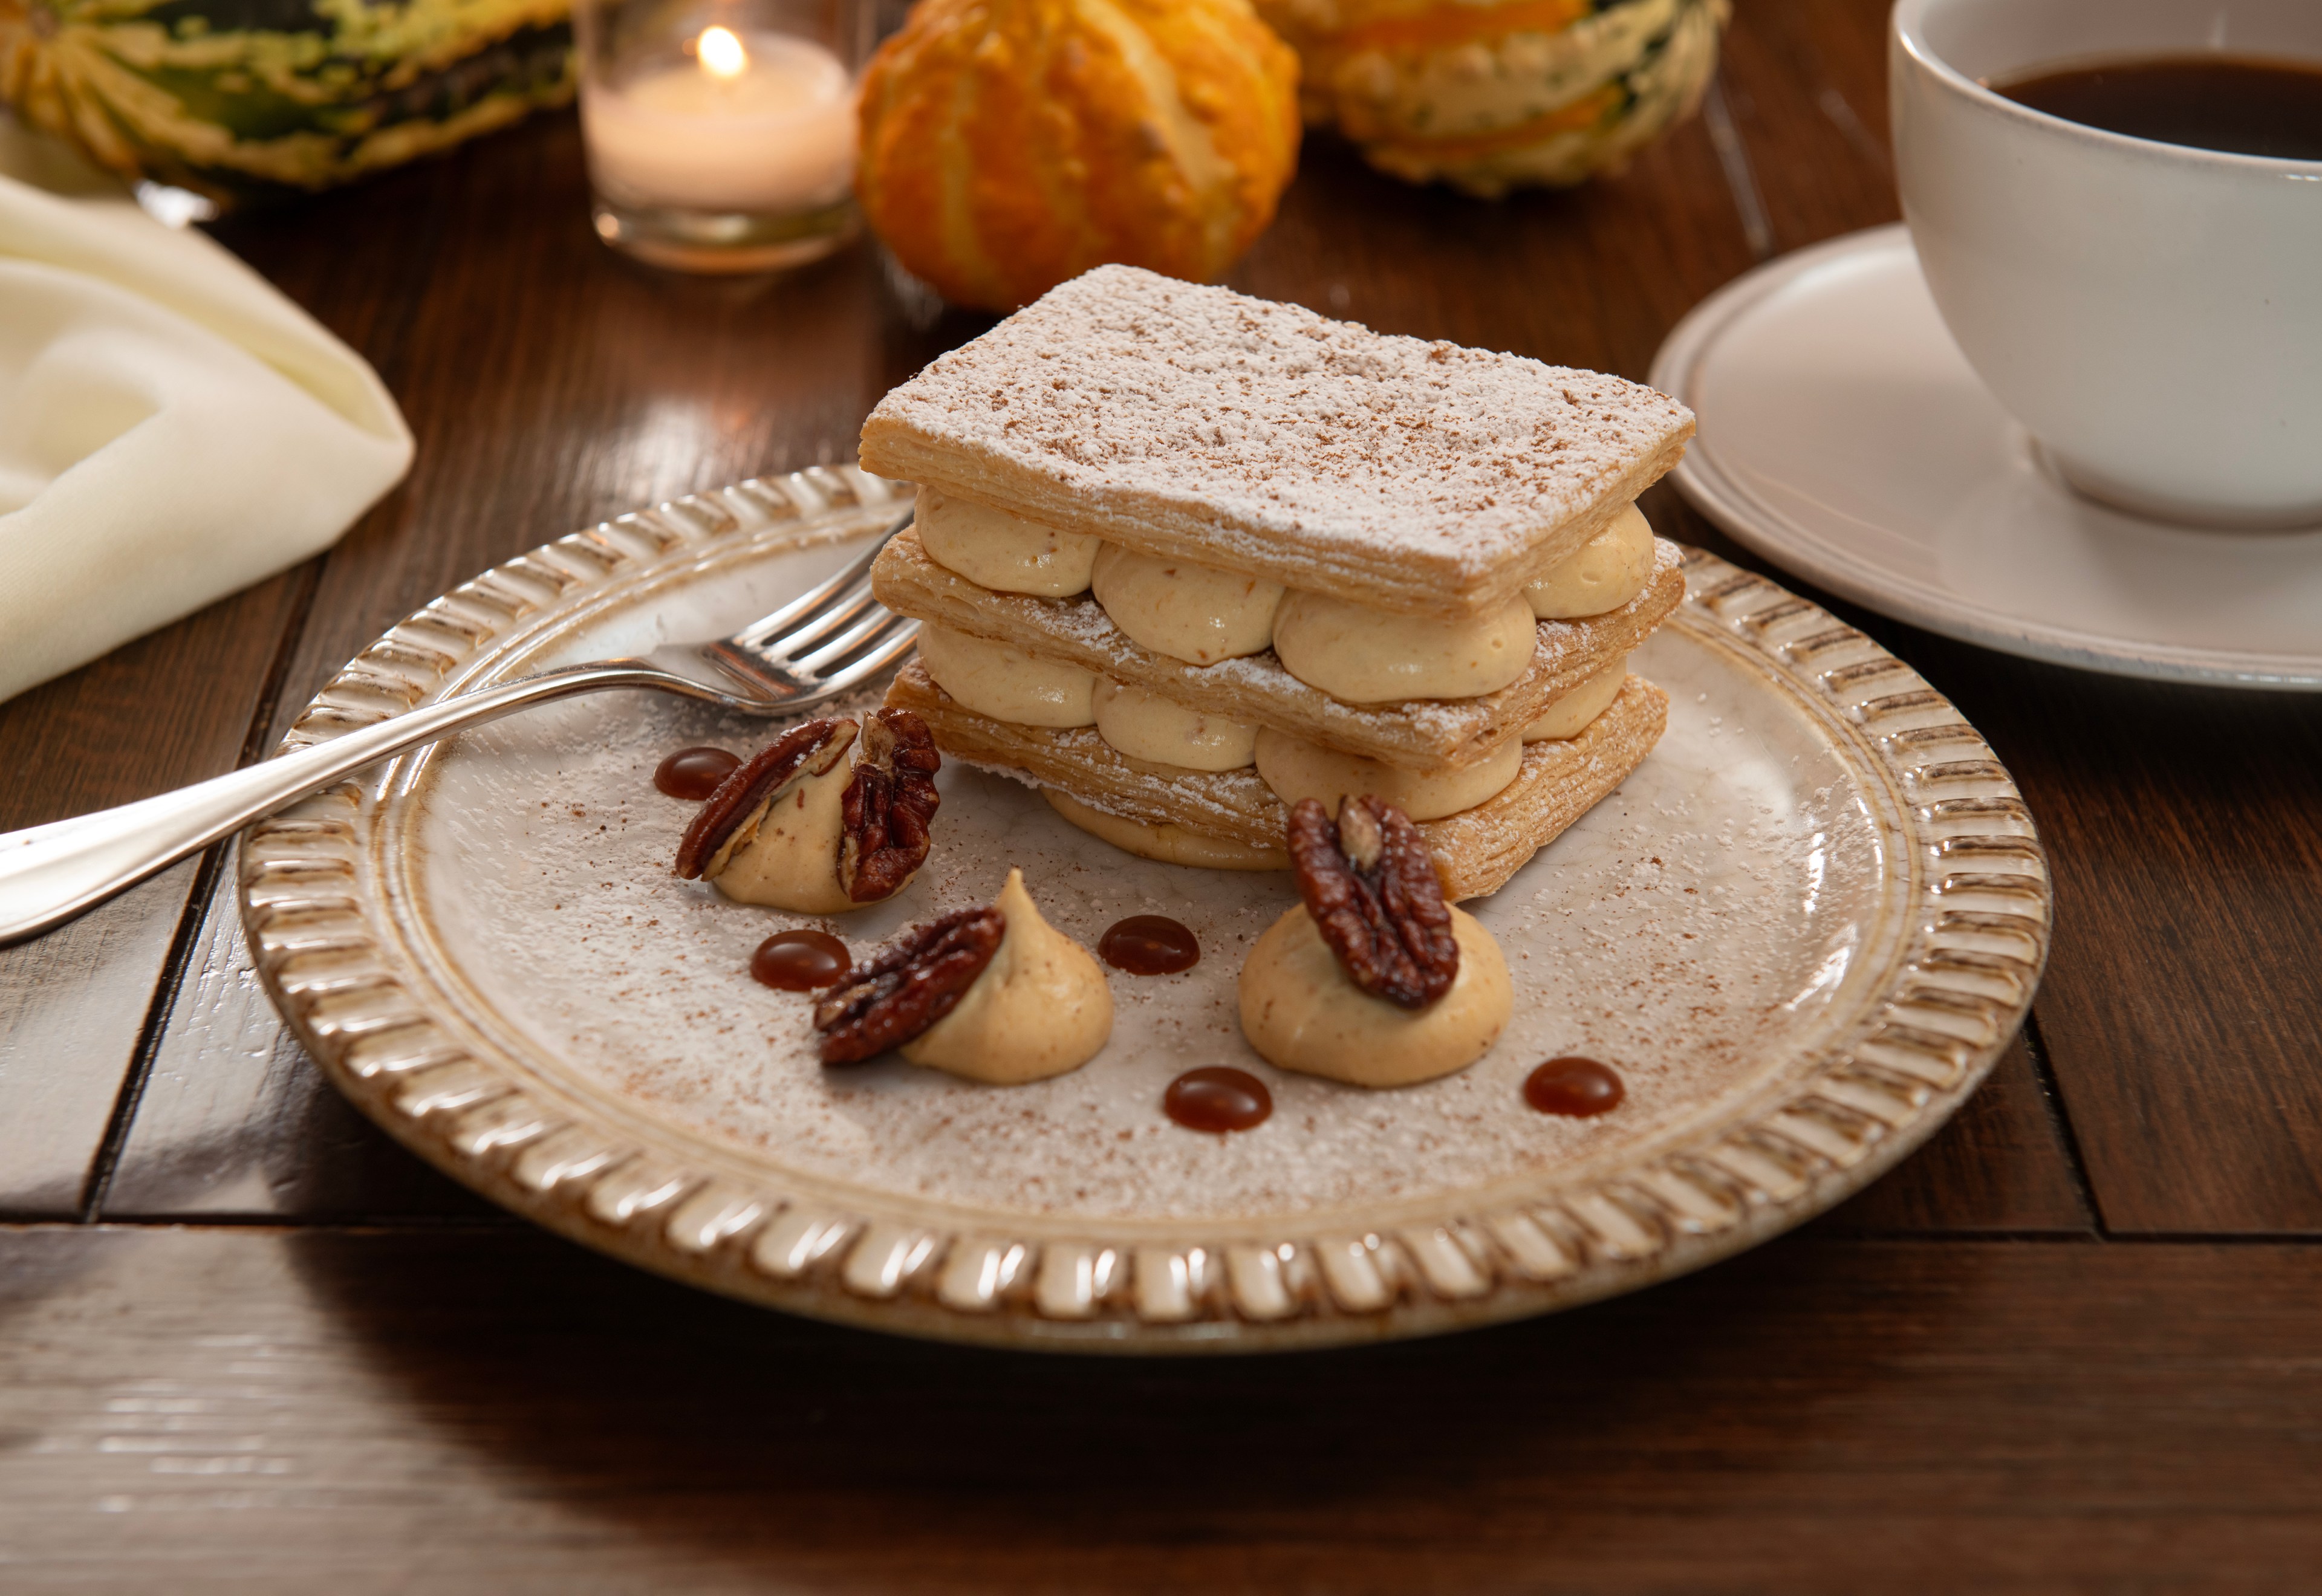 An image of mille-feuille pastry with pumpkin cream sandwiched between layers of pastry, with pecan nut crumbles as garnish. 